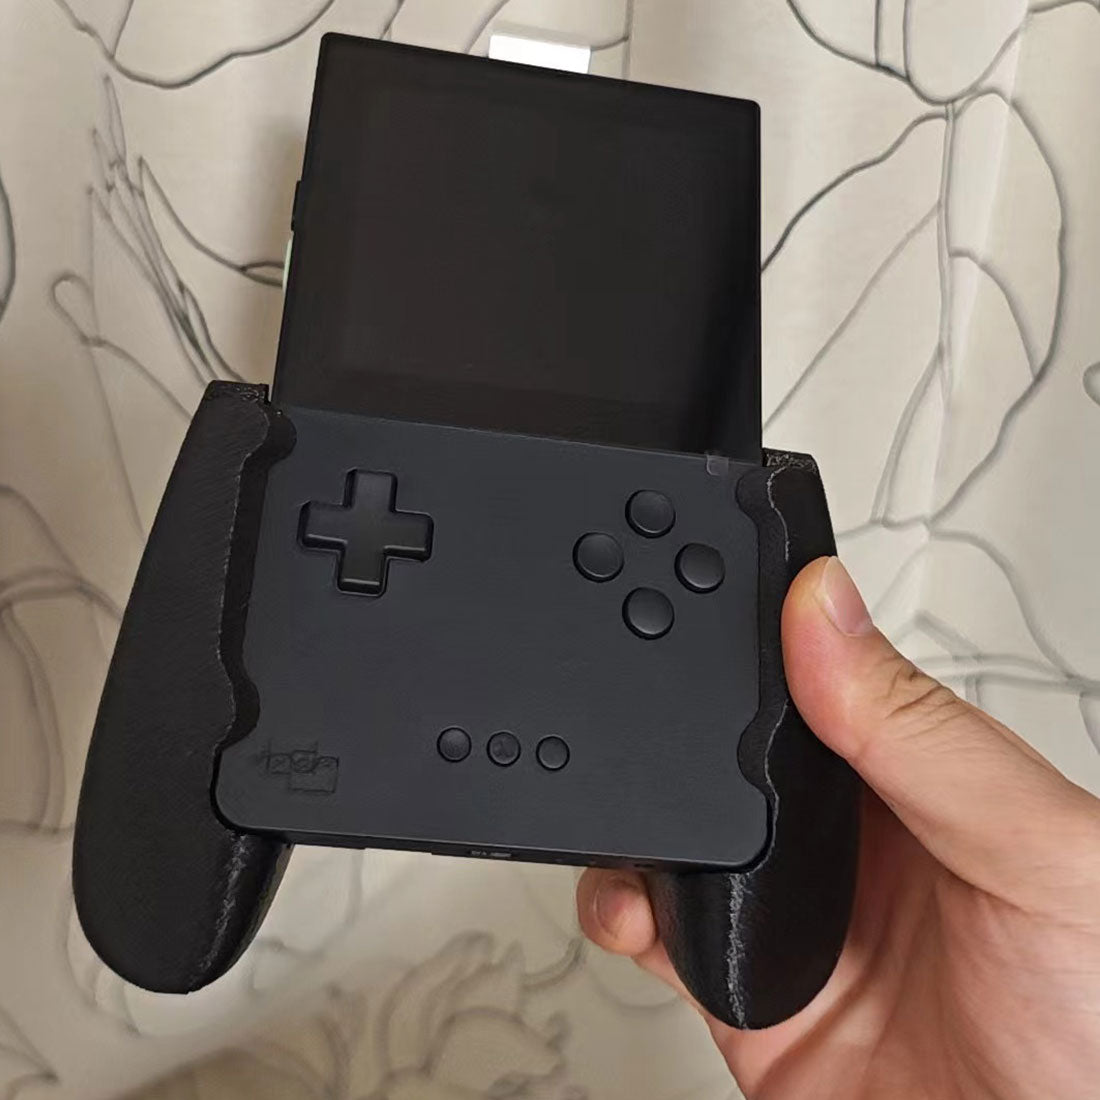 litnxt_3D_printed_flexible_handle_for_analogue_pocket_game_consoles_black_06